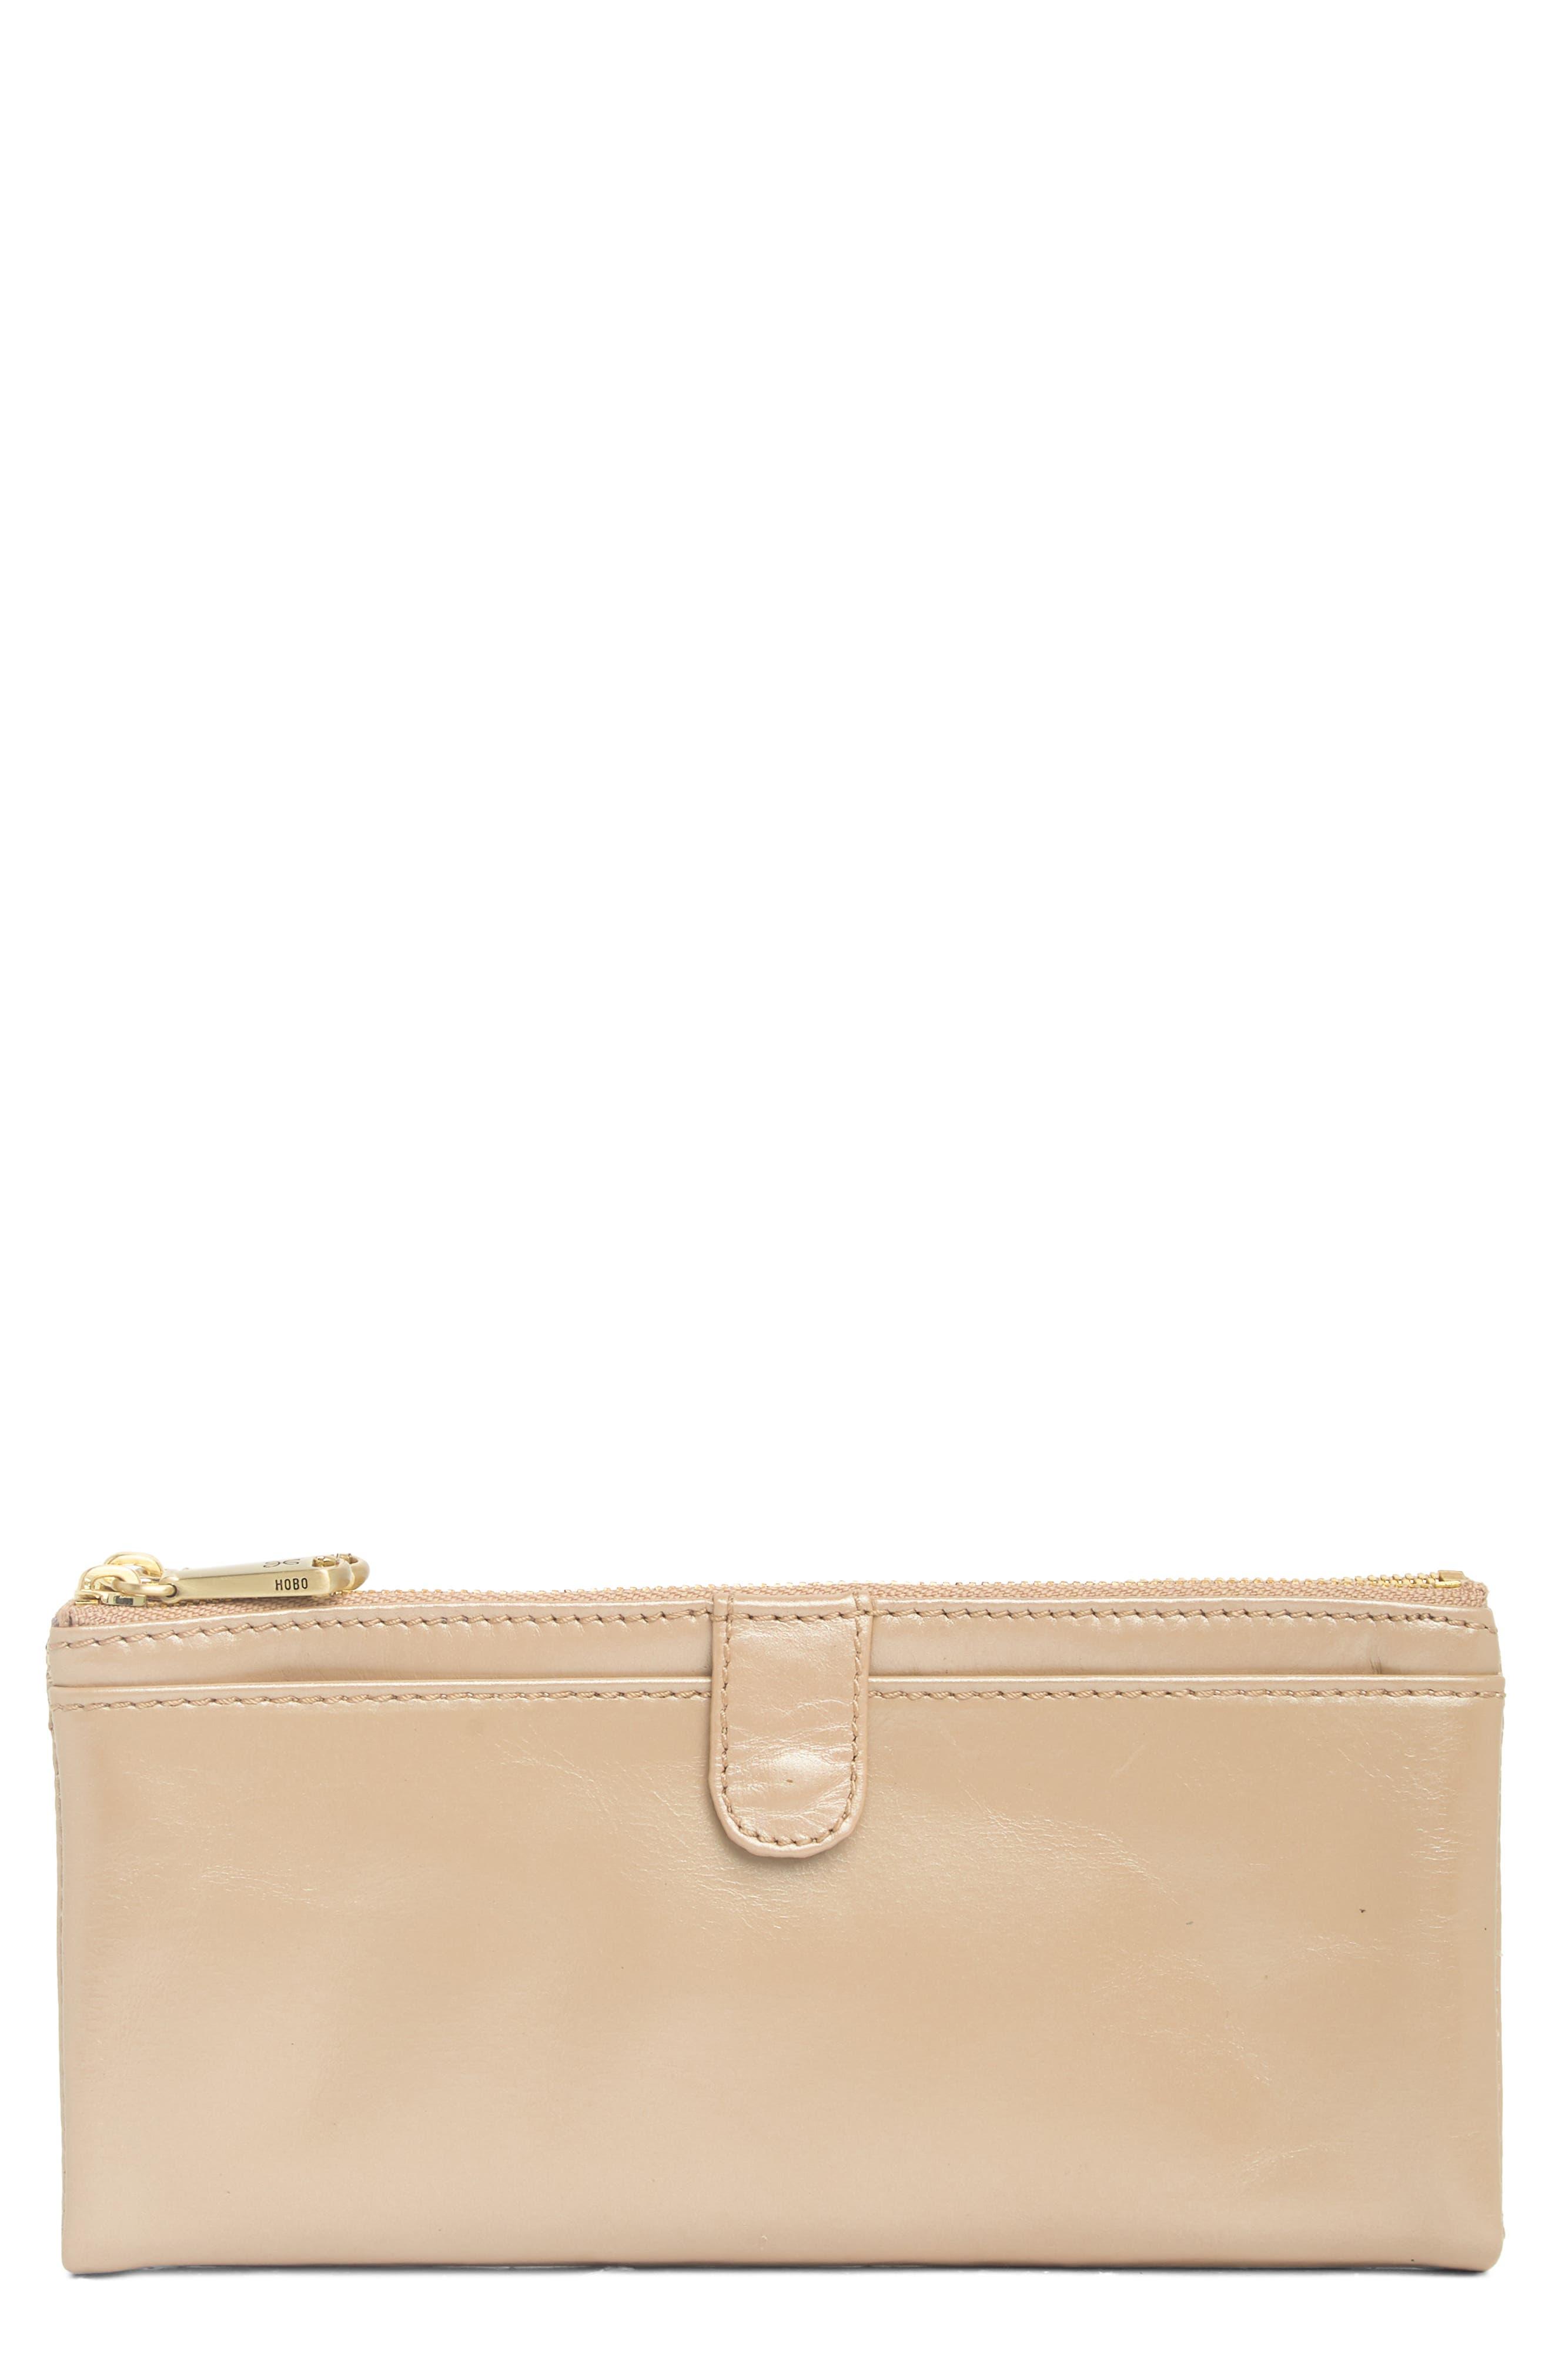 Hobo International Taylor Leather Wallet In Blush At Nordstrom Rack in Pink  | Lyst